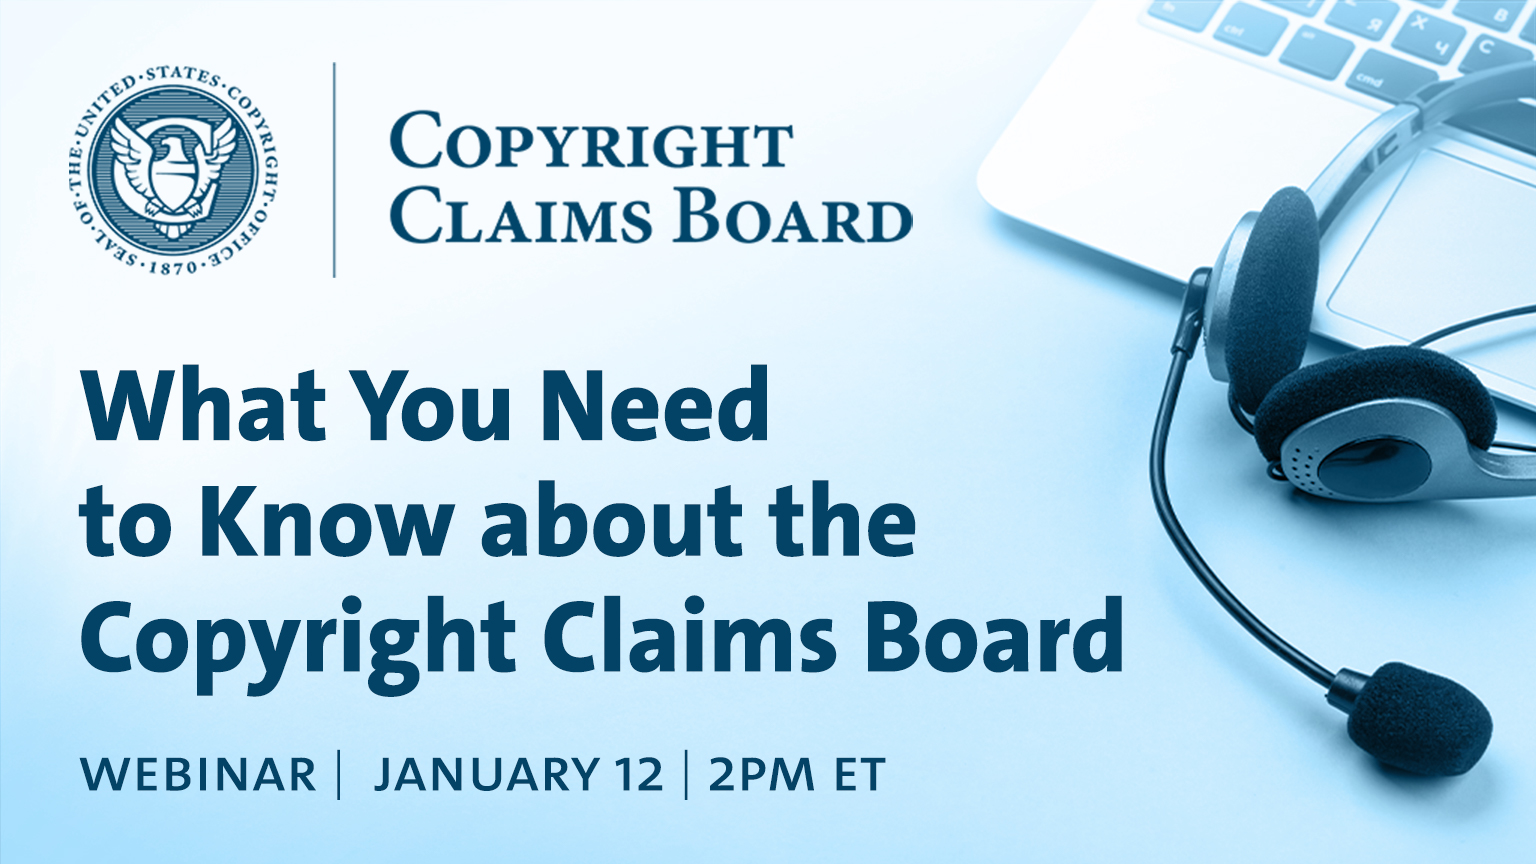 What You Need to Know about Small Claims and the Copyright Claims Board